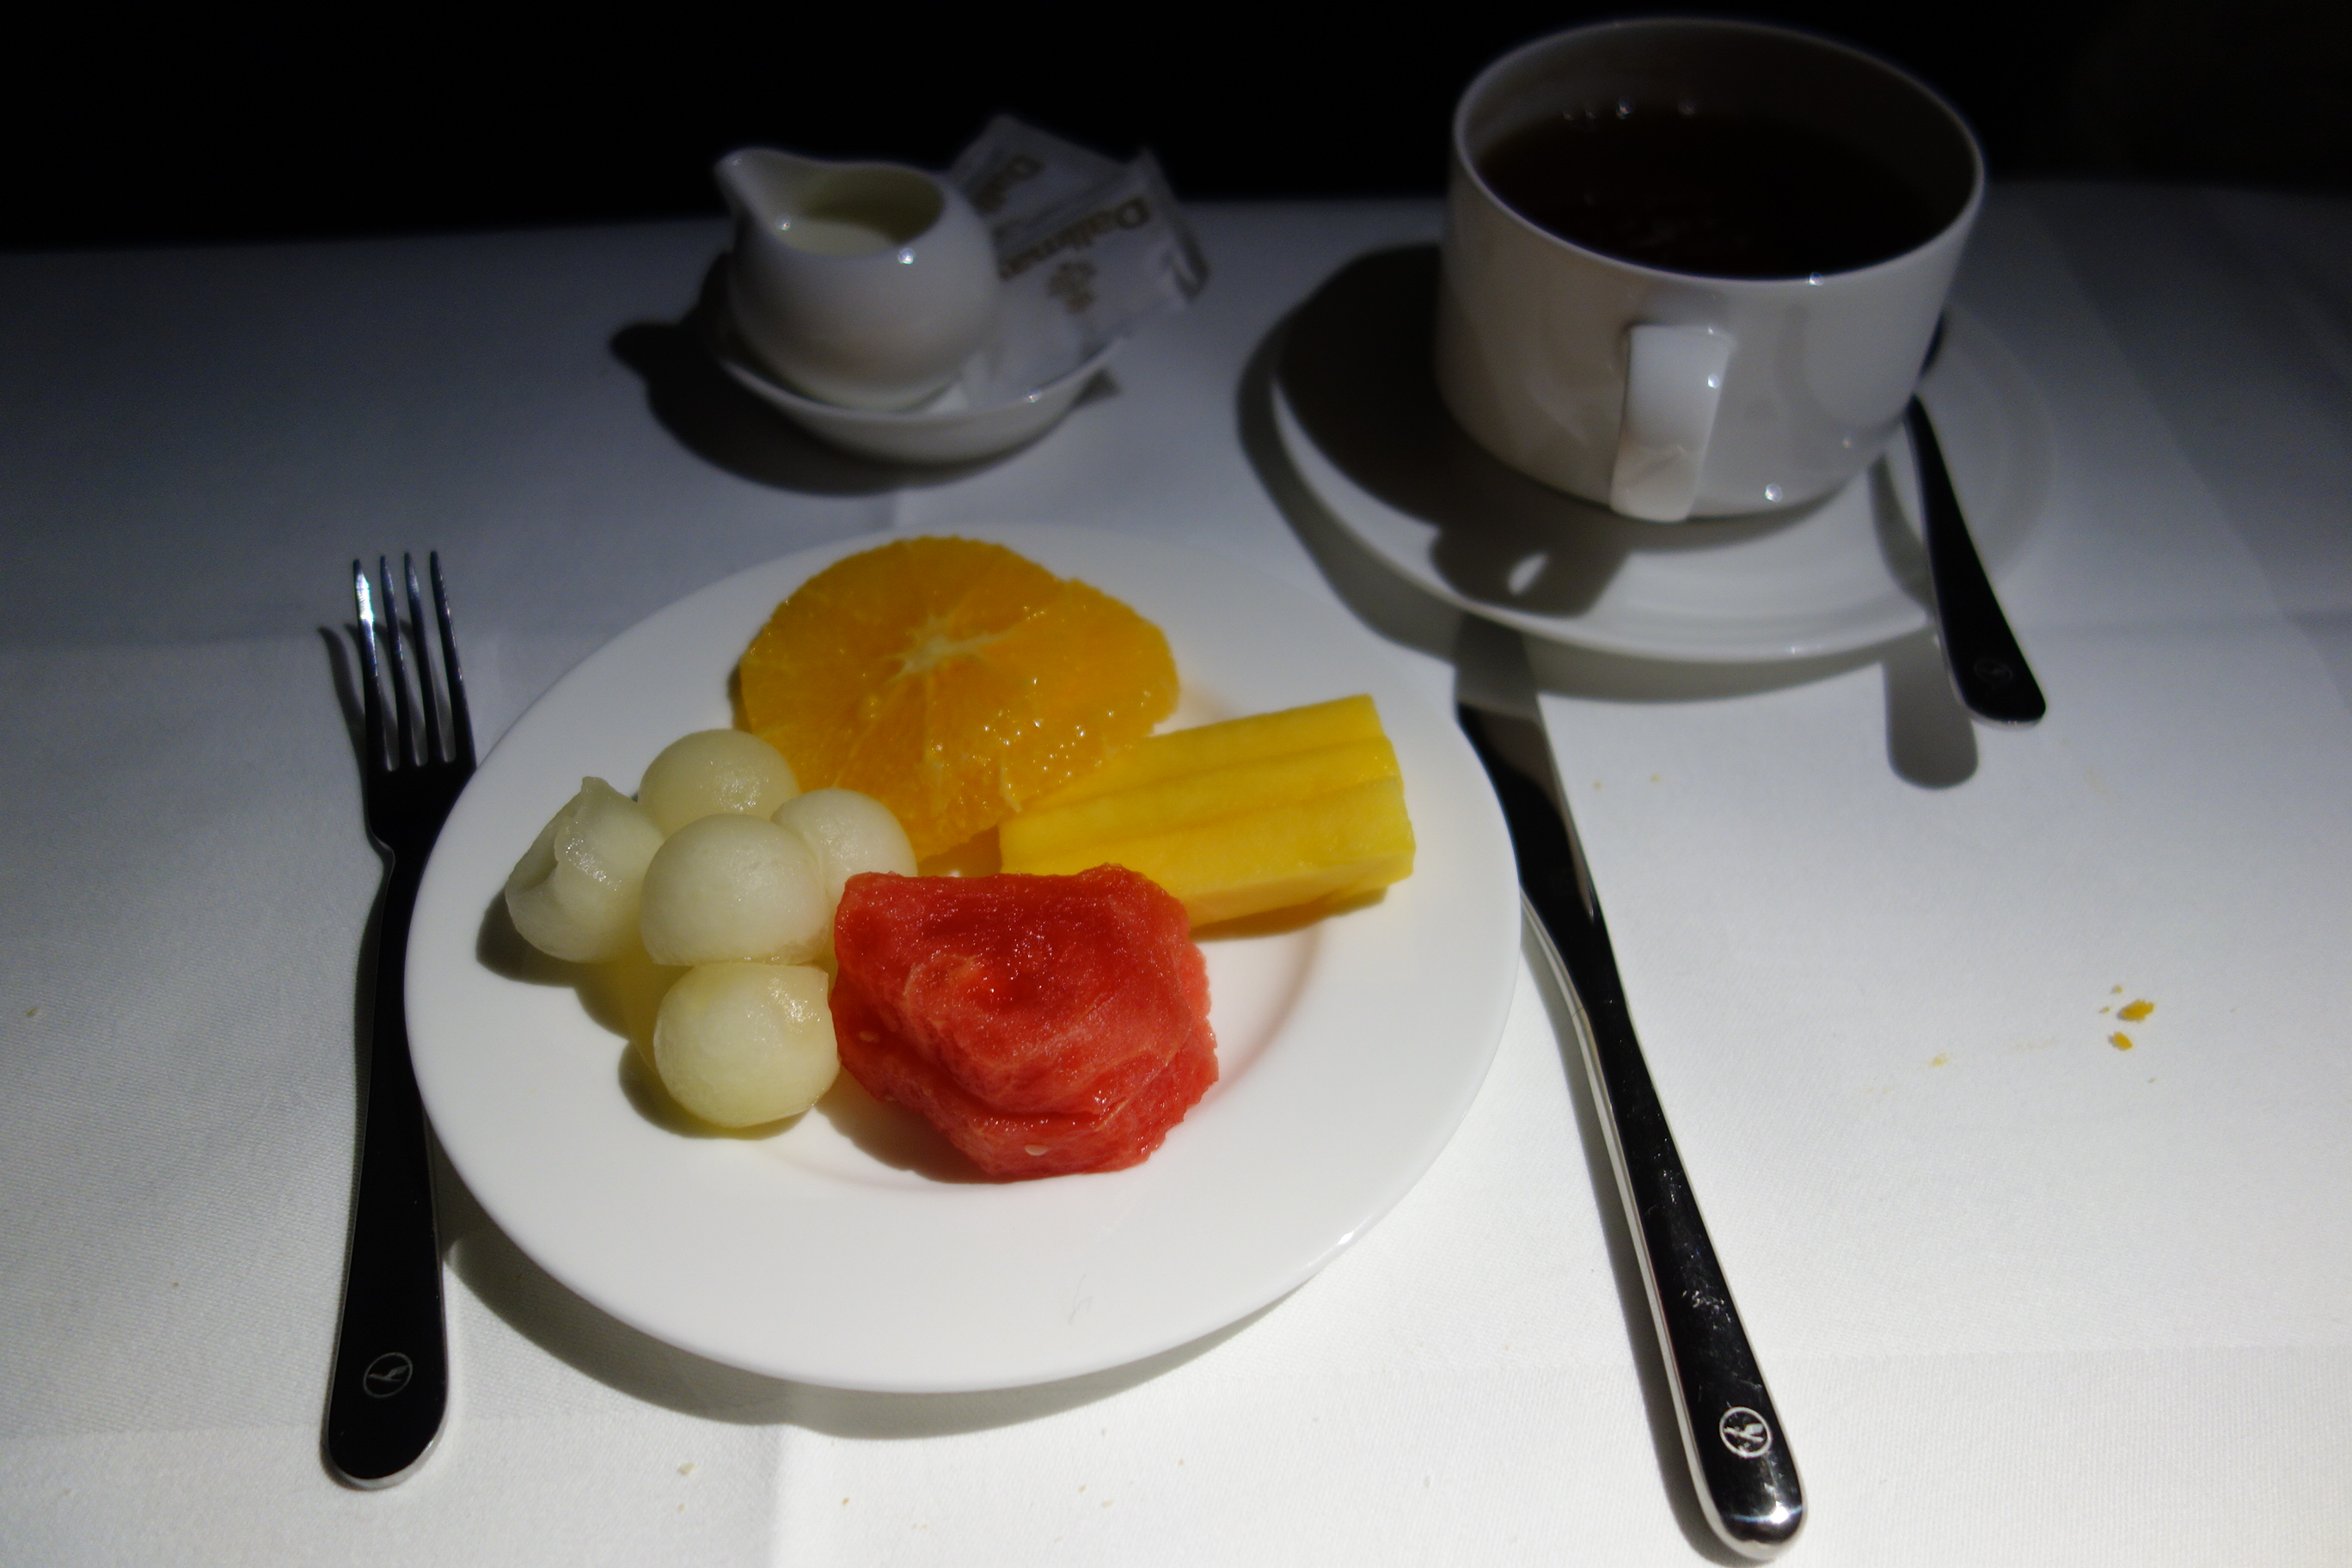 Fruit plate and tea